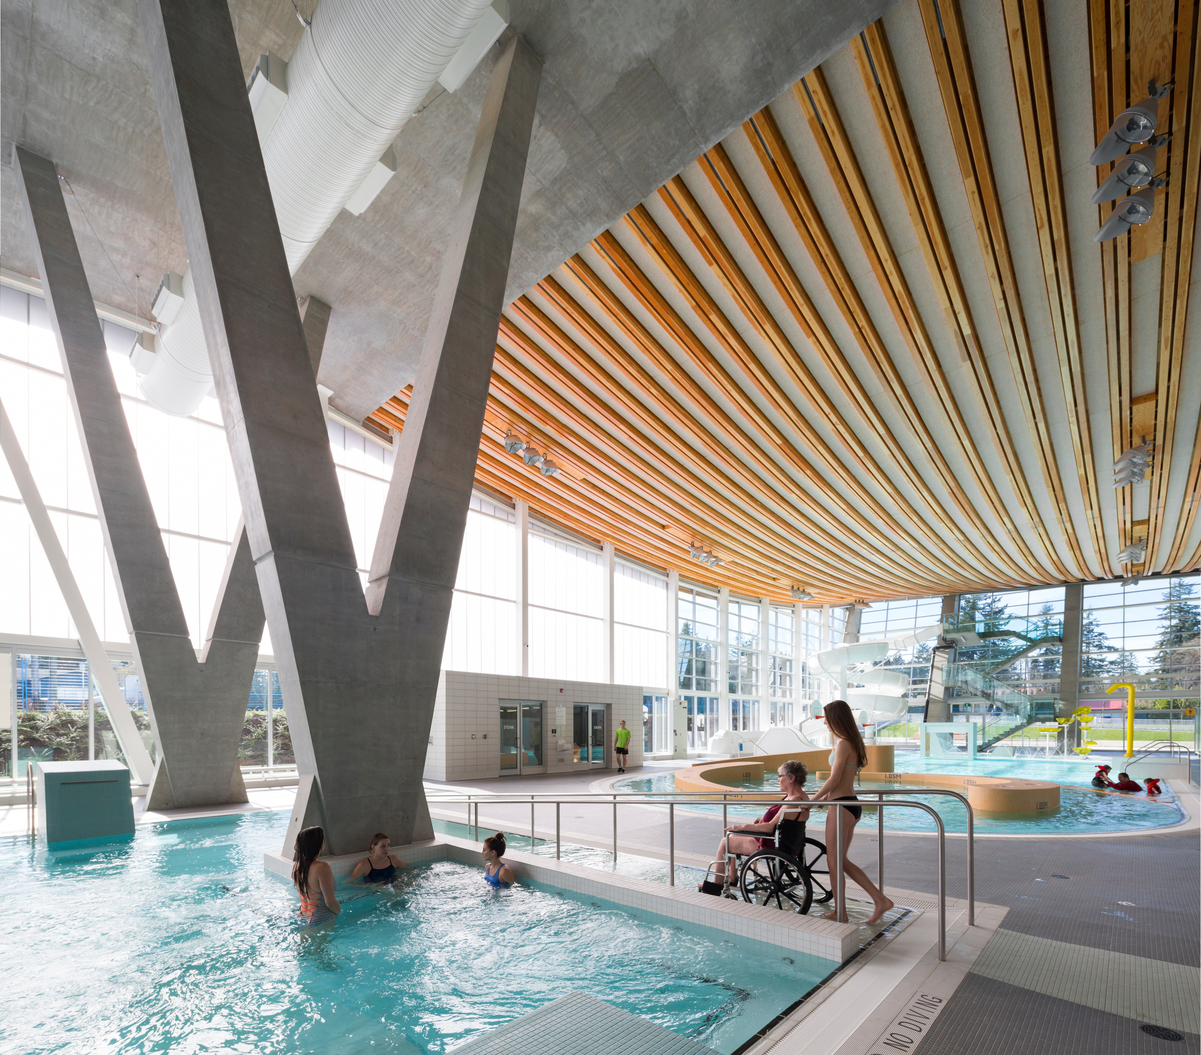 Interior daytime view of Grandview Heights Aquatic Centre family activity area showing families below with glulam-cable prefab roof assembly above